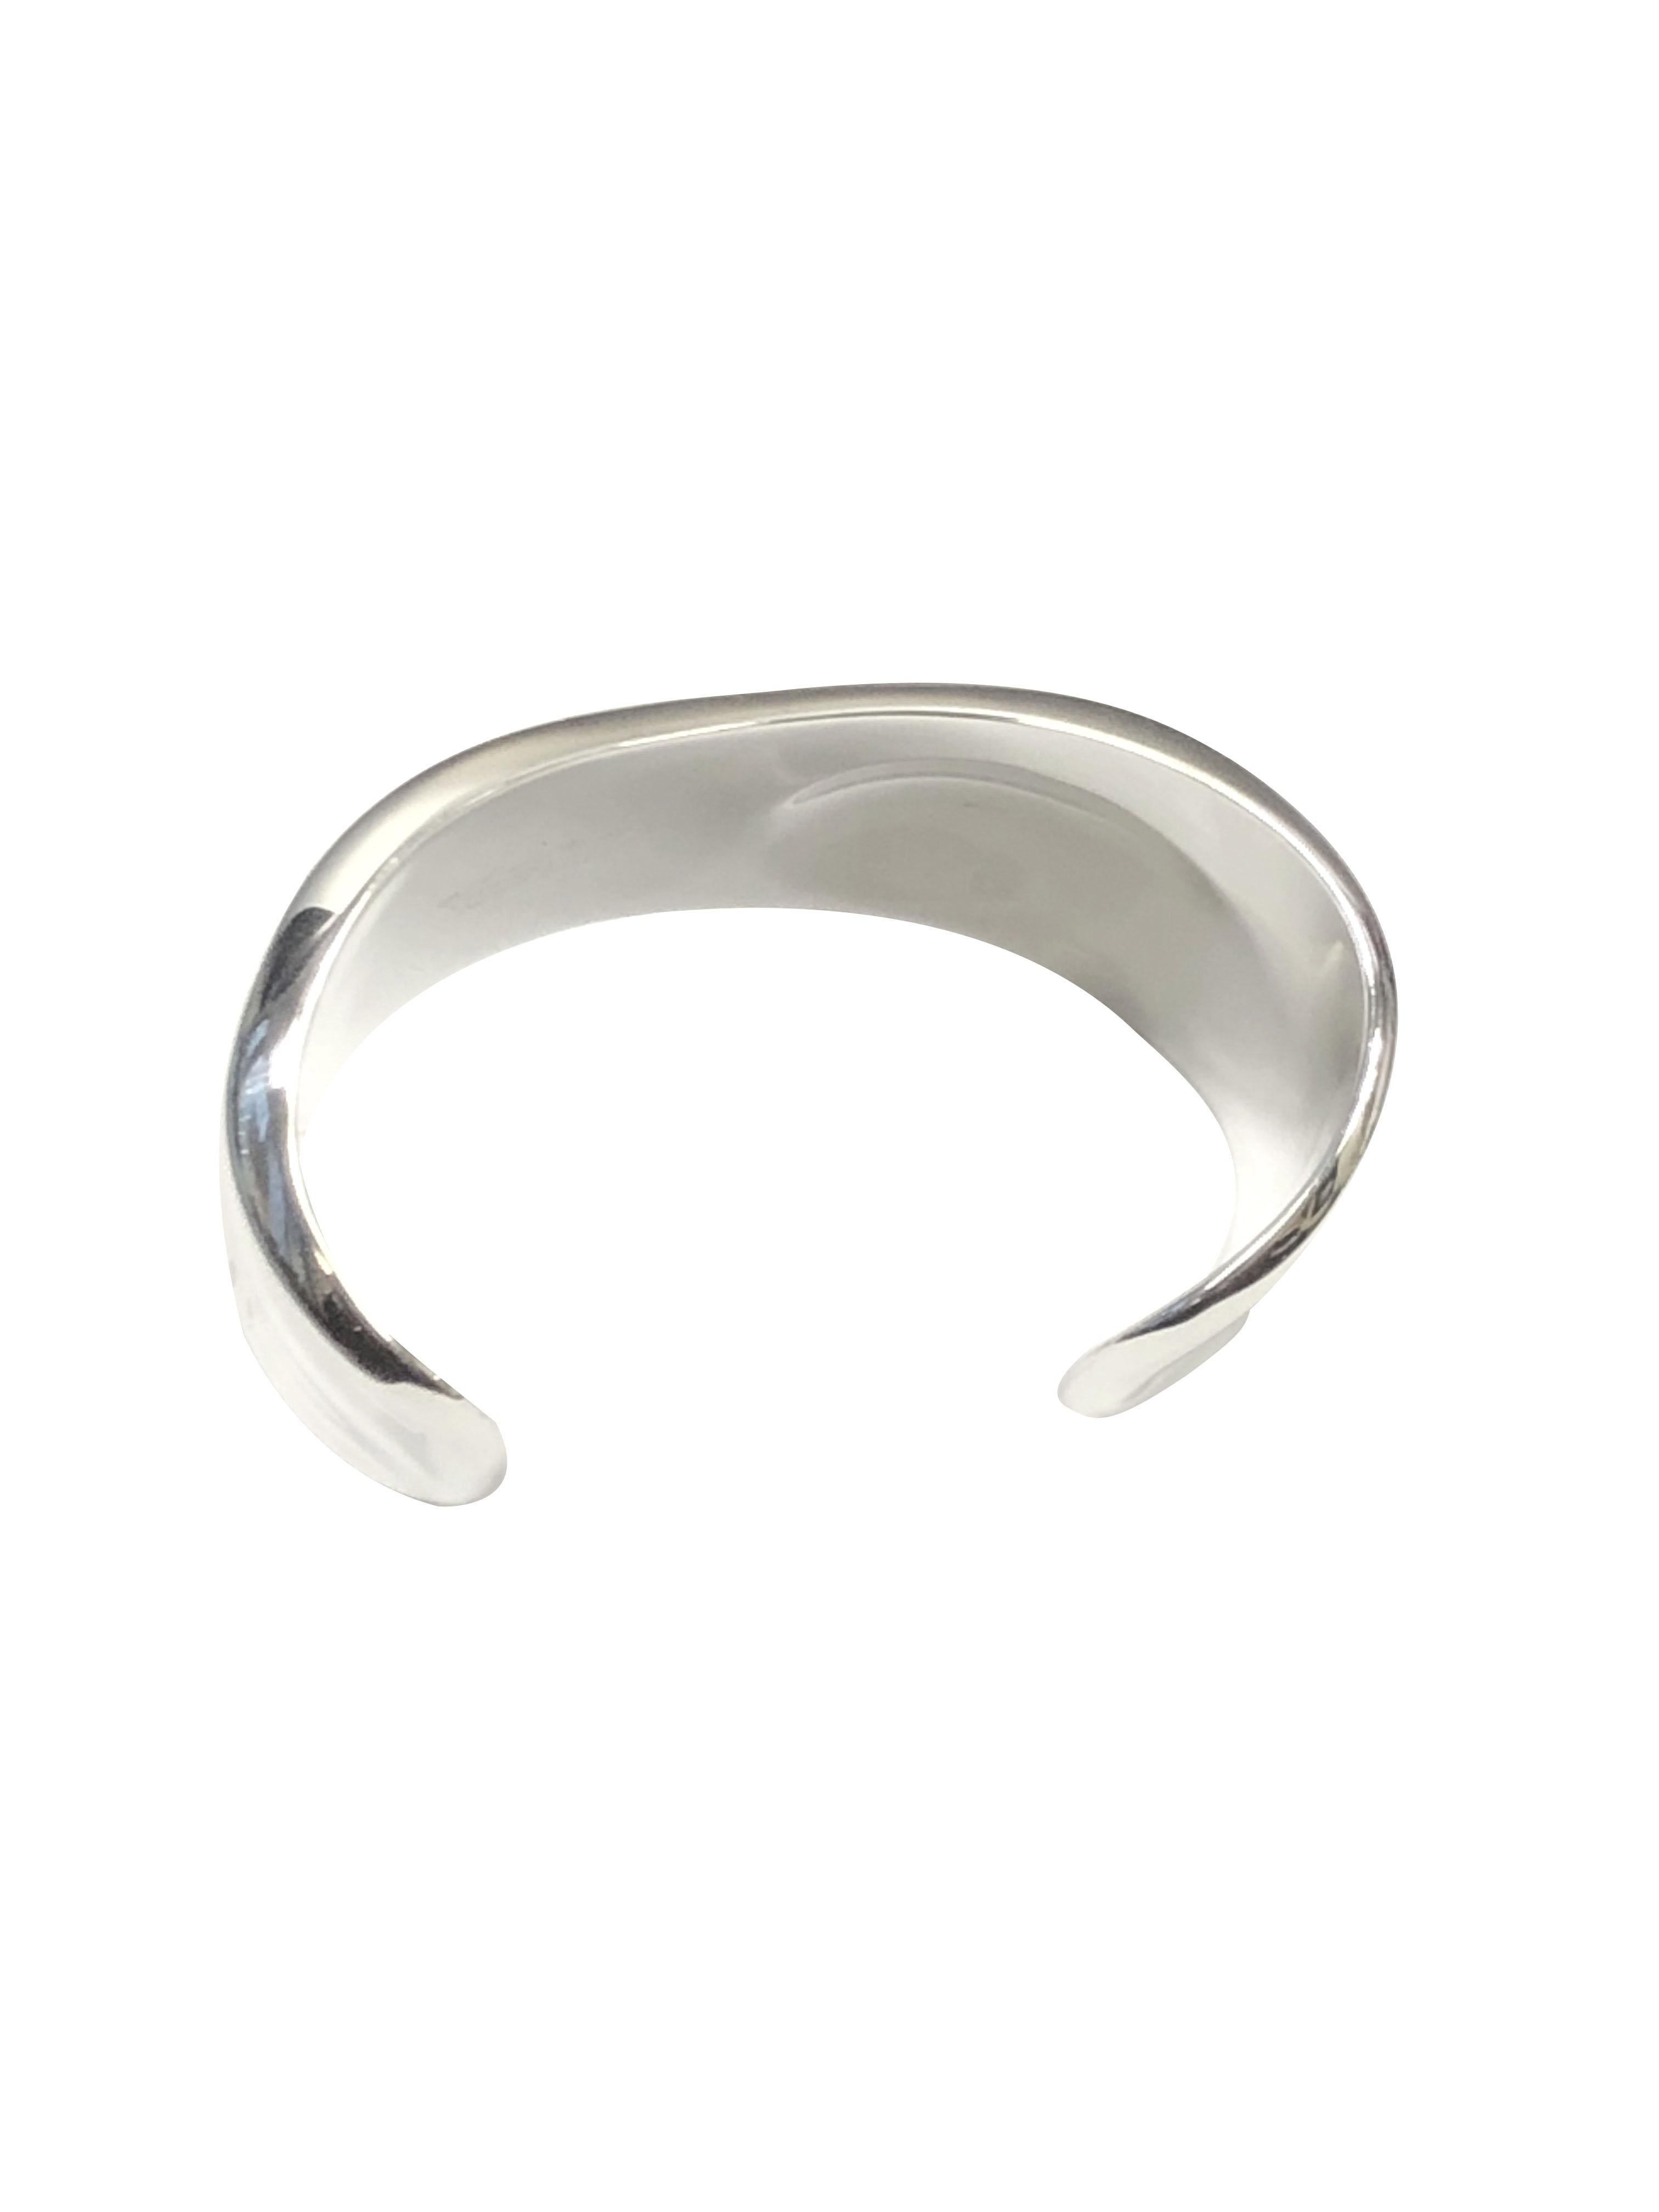 Circa 2000 Elsa Peretti for Tiffany & Co., Sterling Silver Medium Bone Cuff Bracelet. Measuring 1 1/2 inch at its widest point, an opening of 1 1/8 inch and an inside measurement of approximately 6 1/8 inch. Comes in a Tiffany dust / travel pouch.